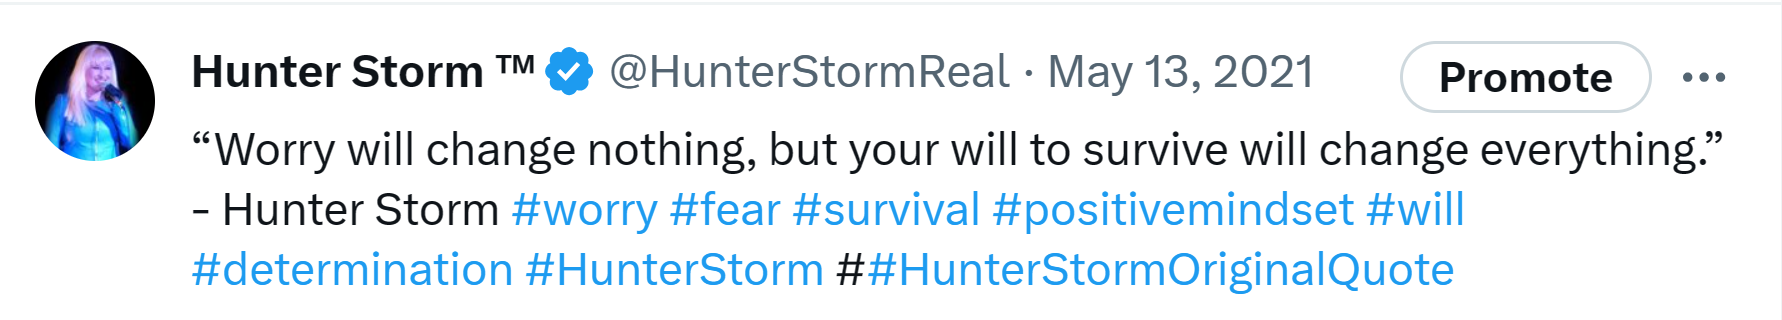 Hunter Storm Wisdom: Timeless Insights and Inspiration | “Worry will change nothing, but your will to survive will change everything.”